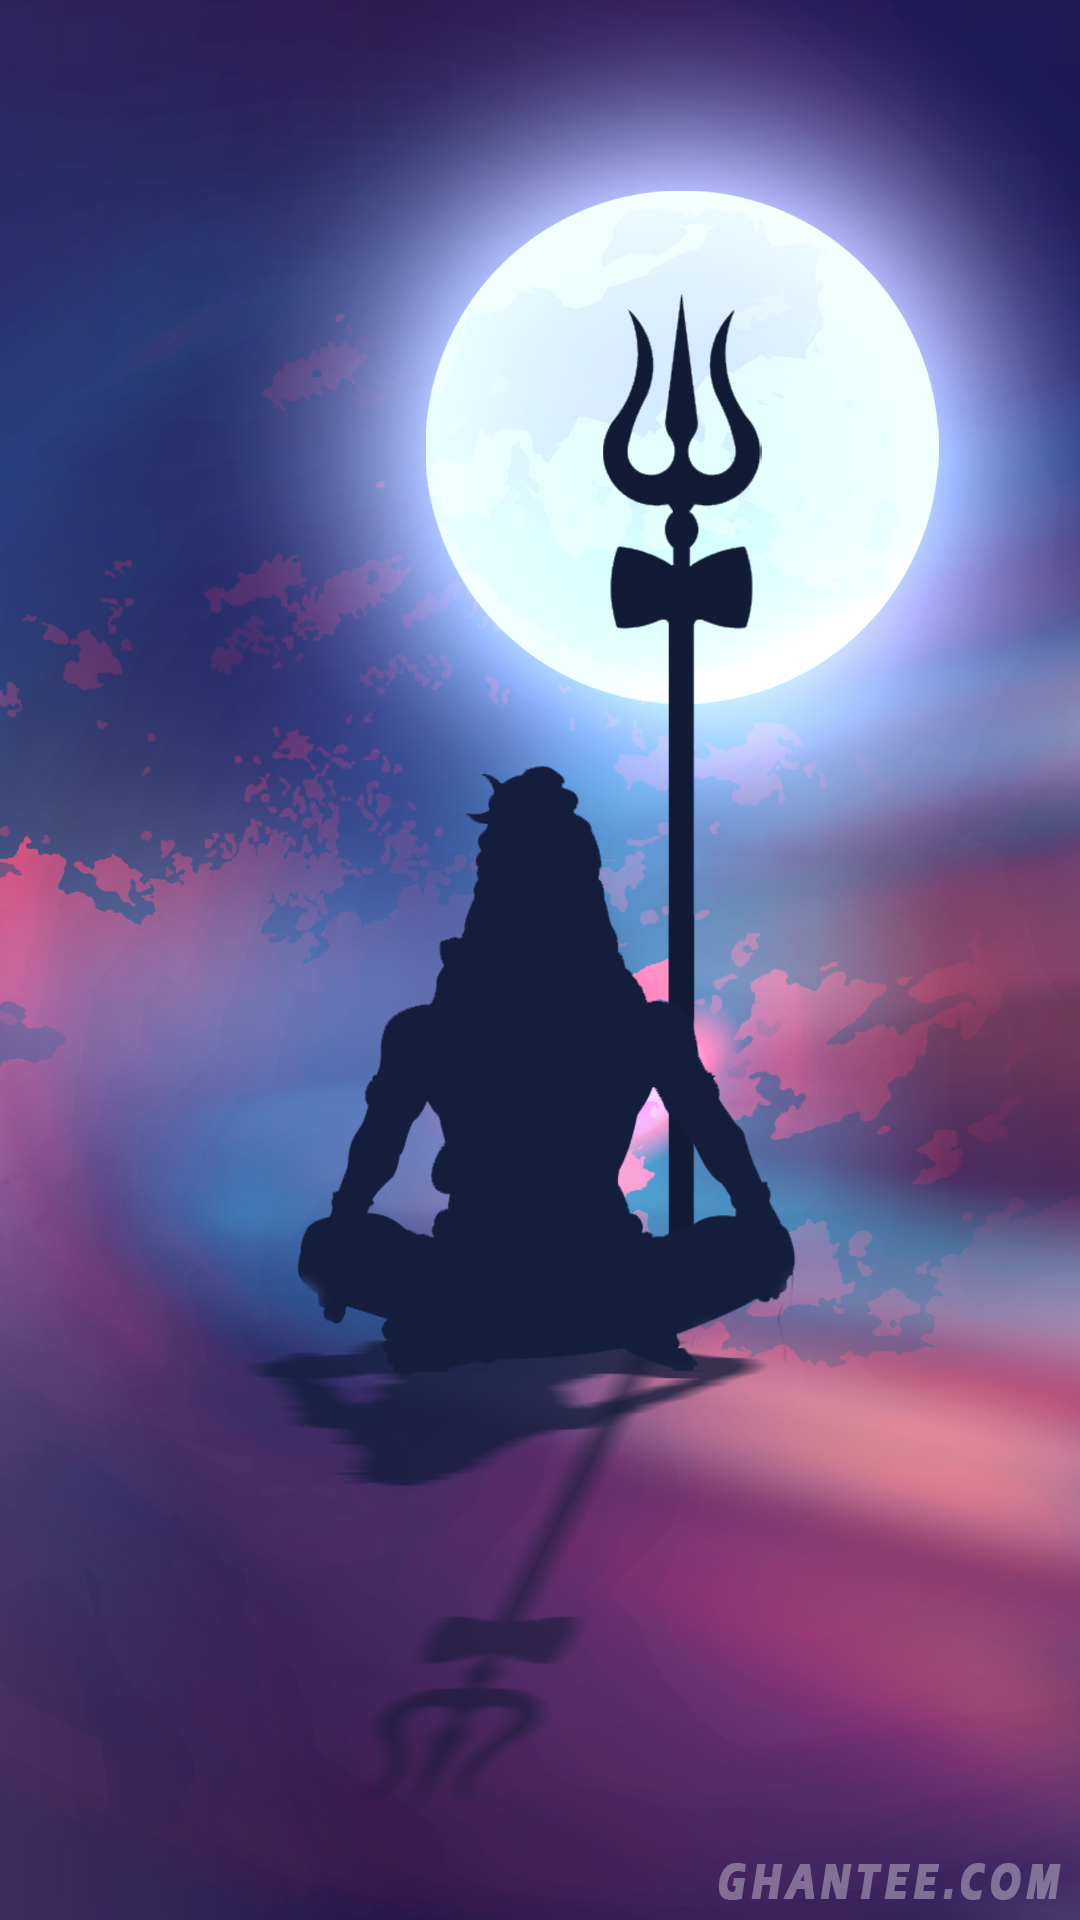 Lord Shiva Meditating In the Forest... by dsg9923 on DeviantArt